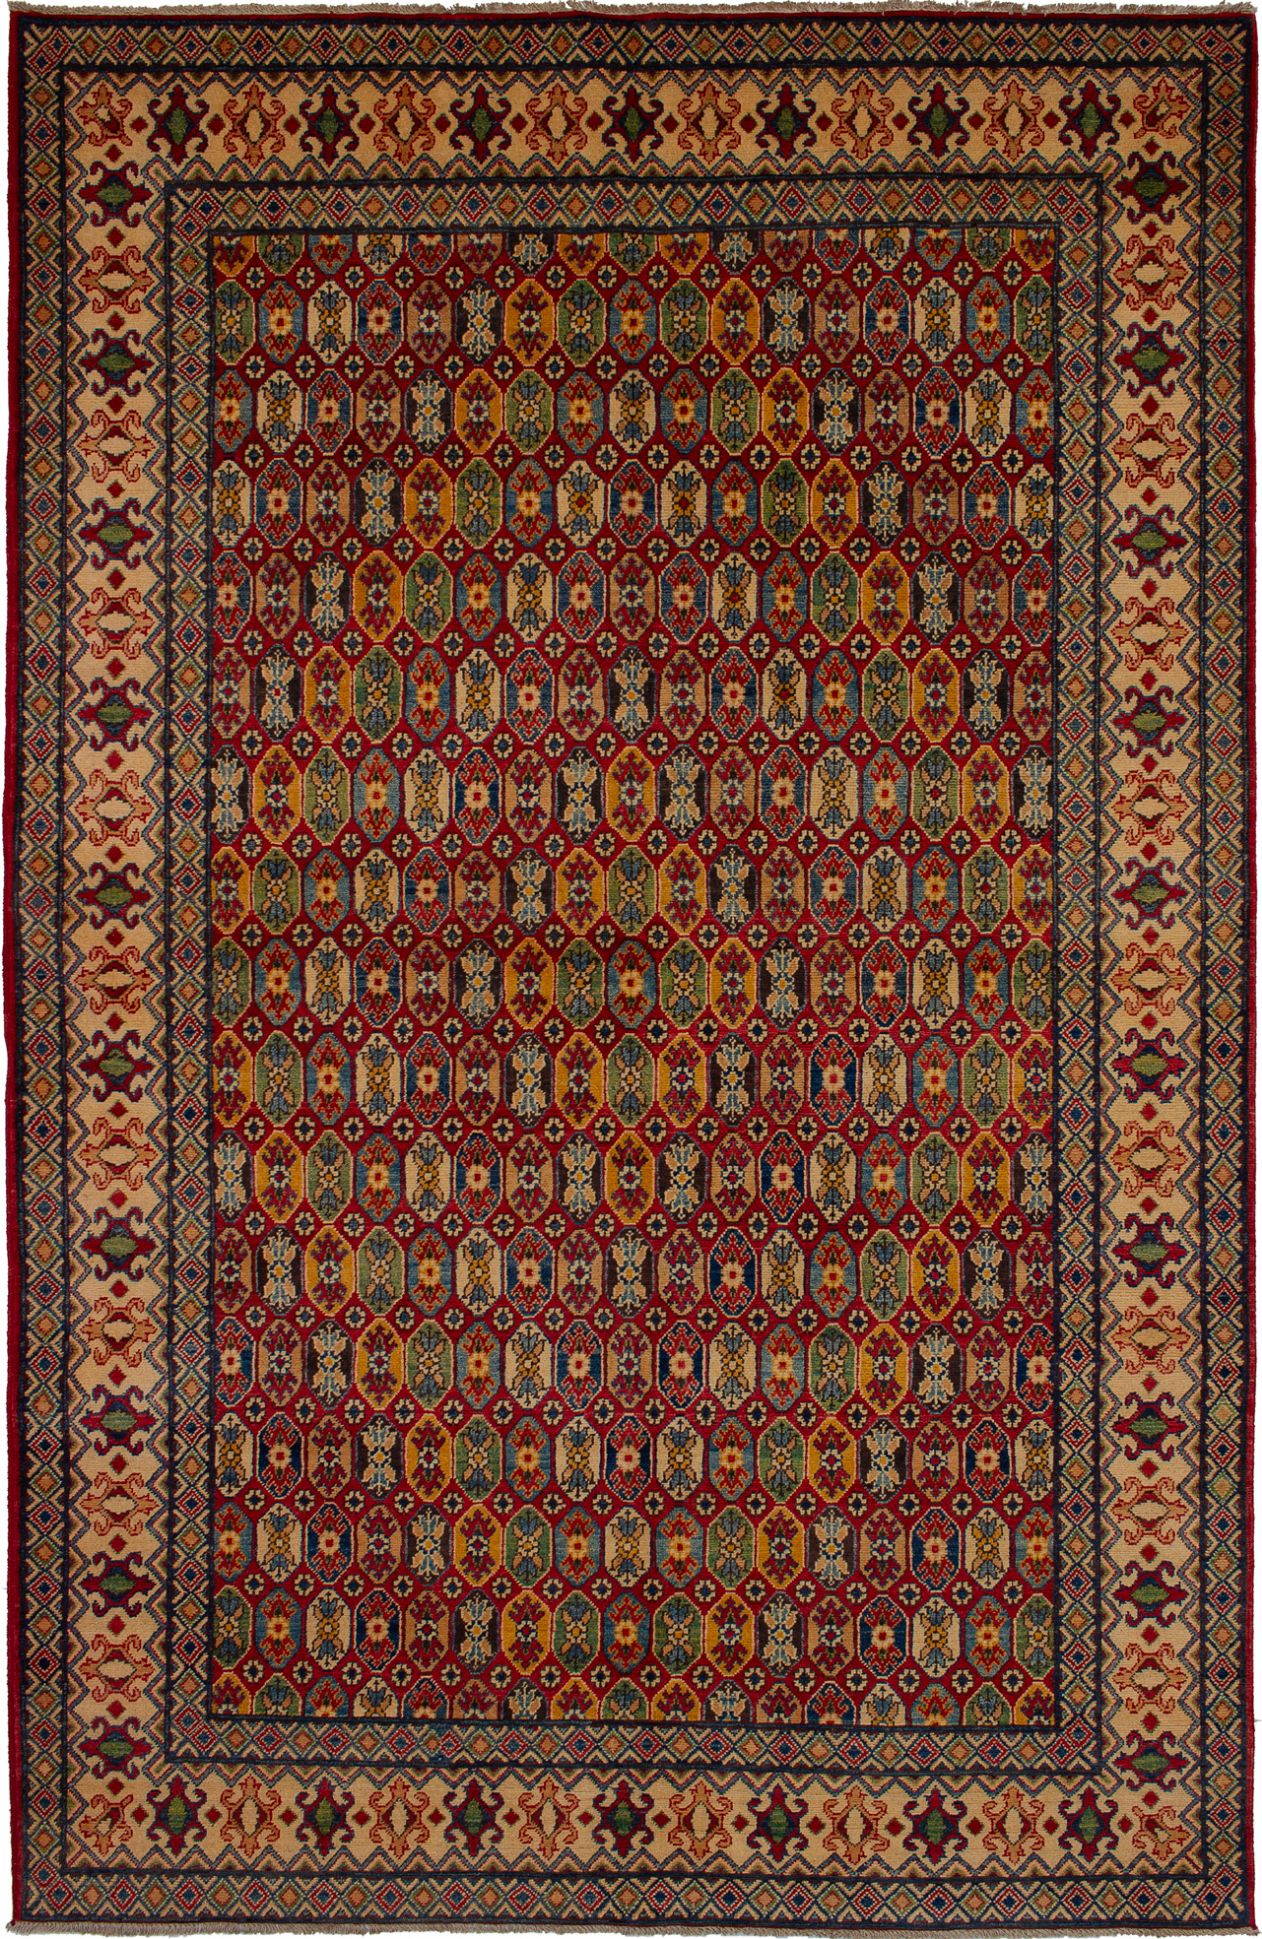 Hand-knotted Finest Gazni Red Wool Rug 6'6" x 10'3"  Size: 6'6" x 10'3"  